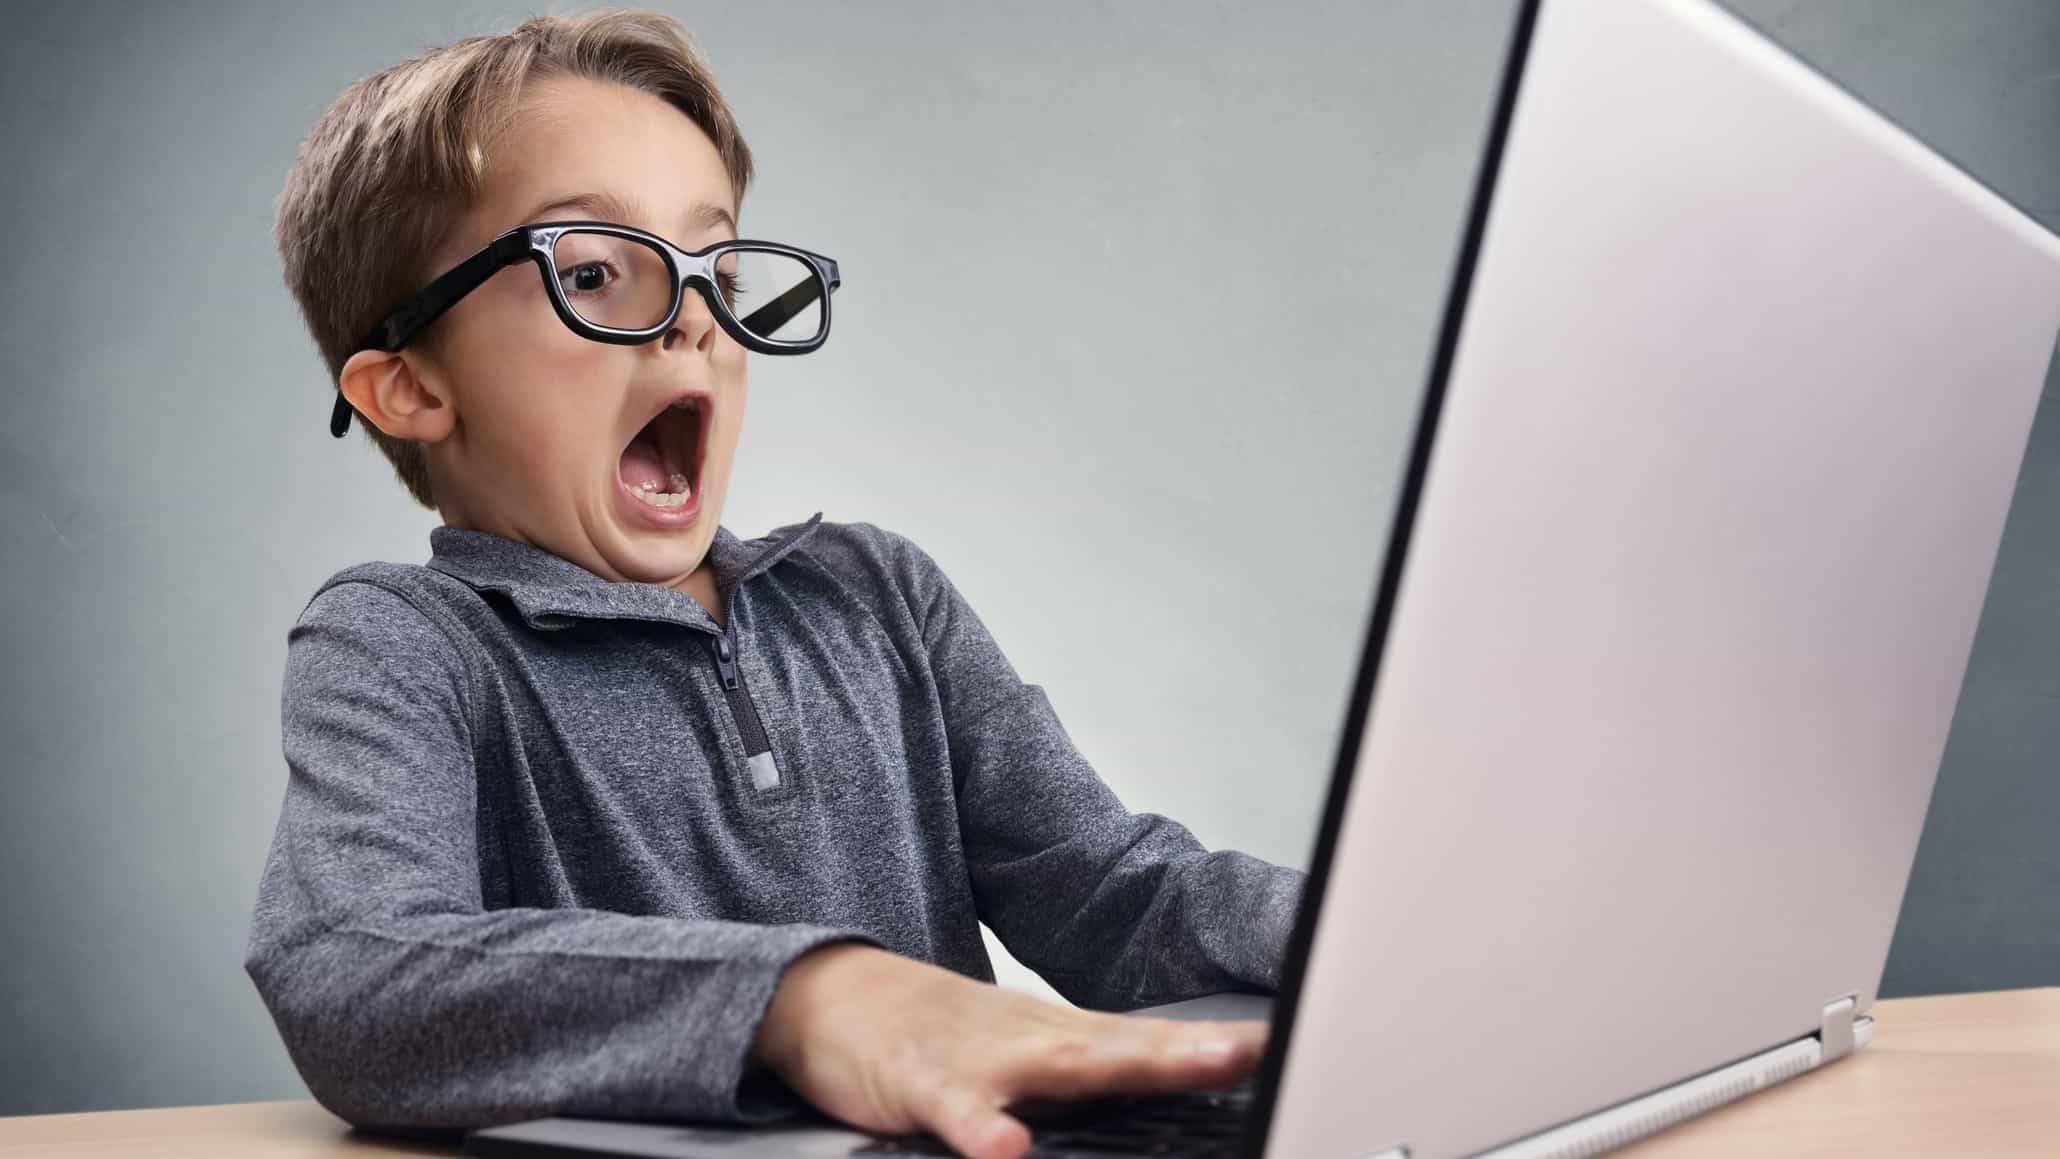 falling asx share price represented by child looking shocked at computer screen